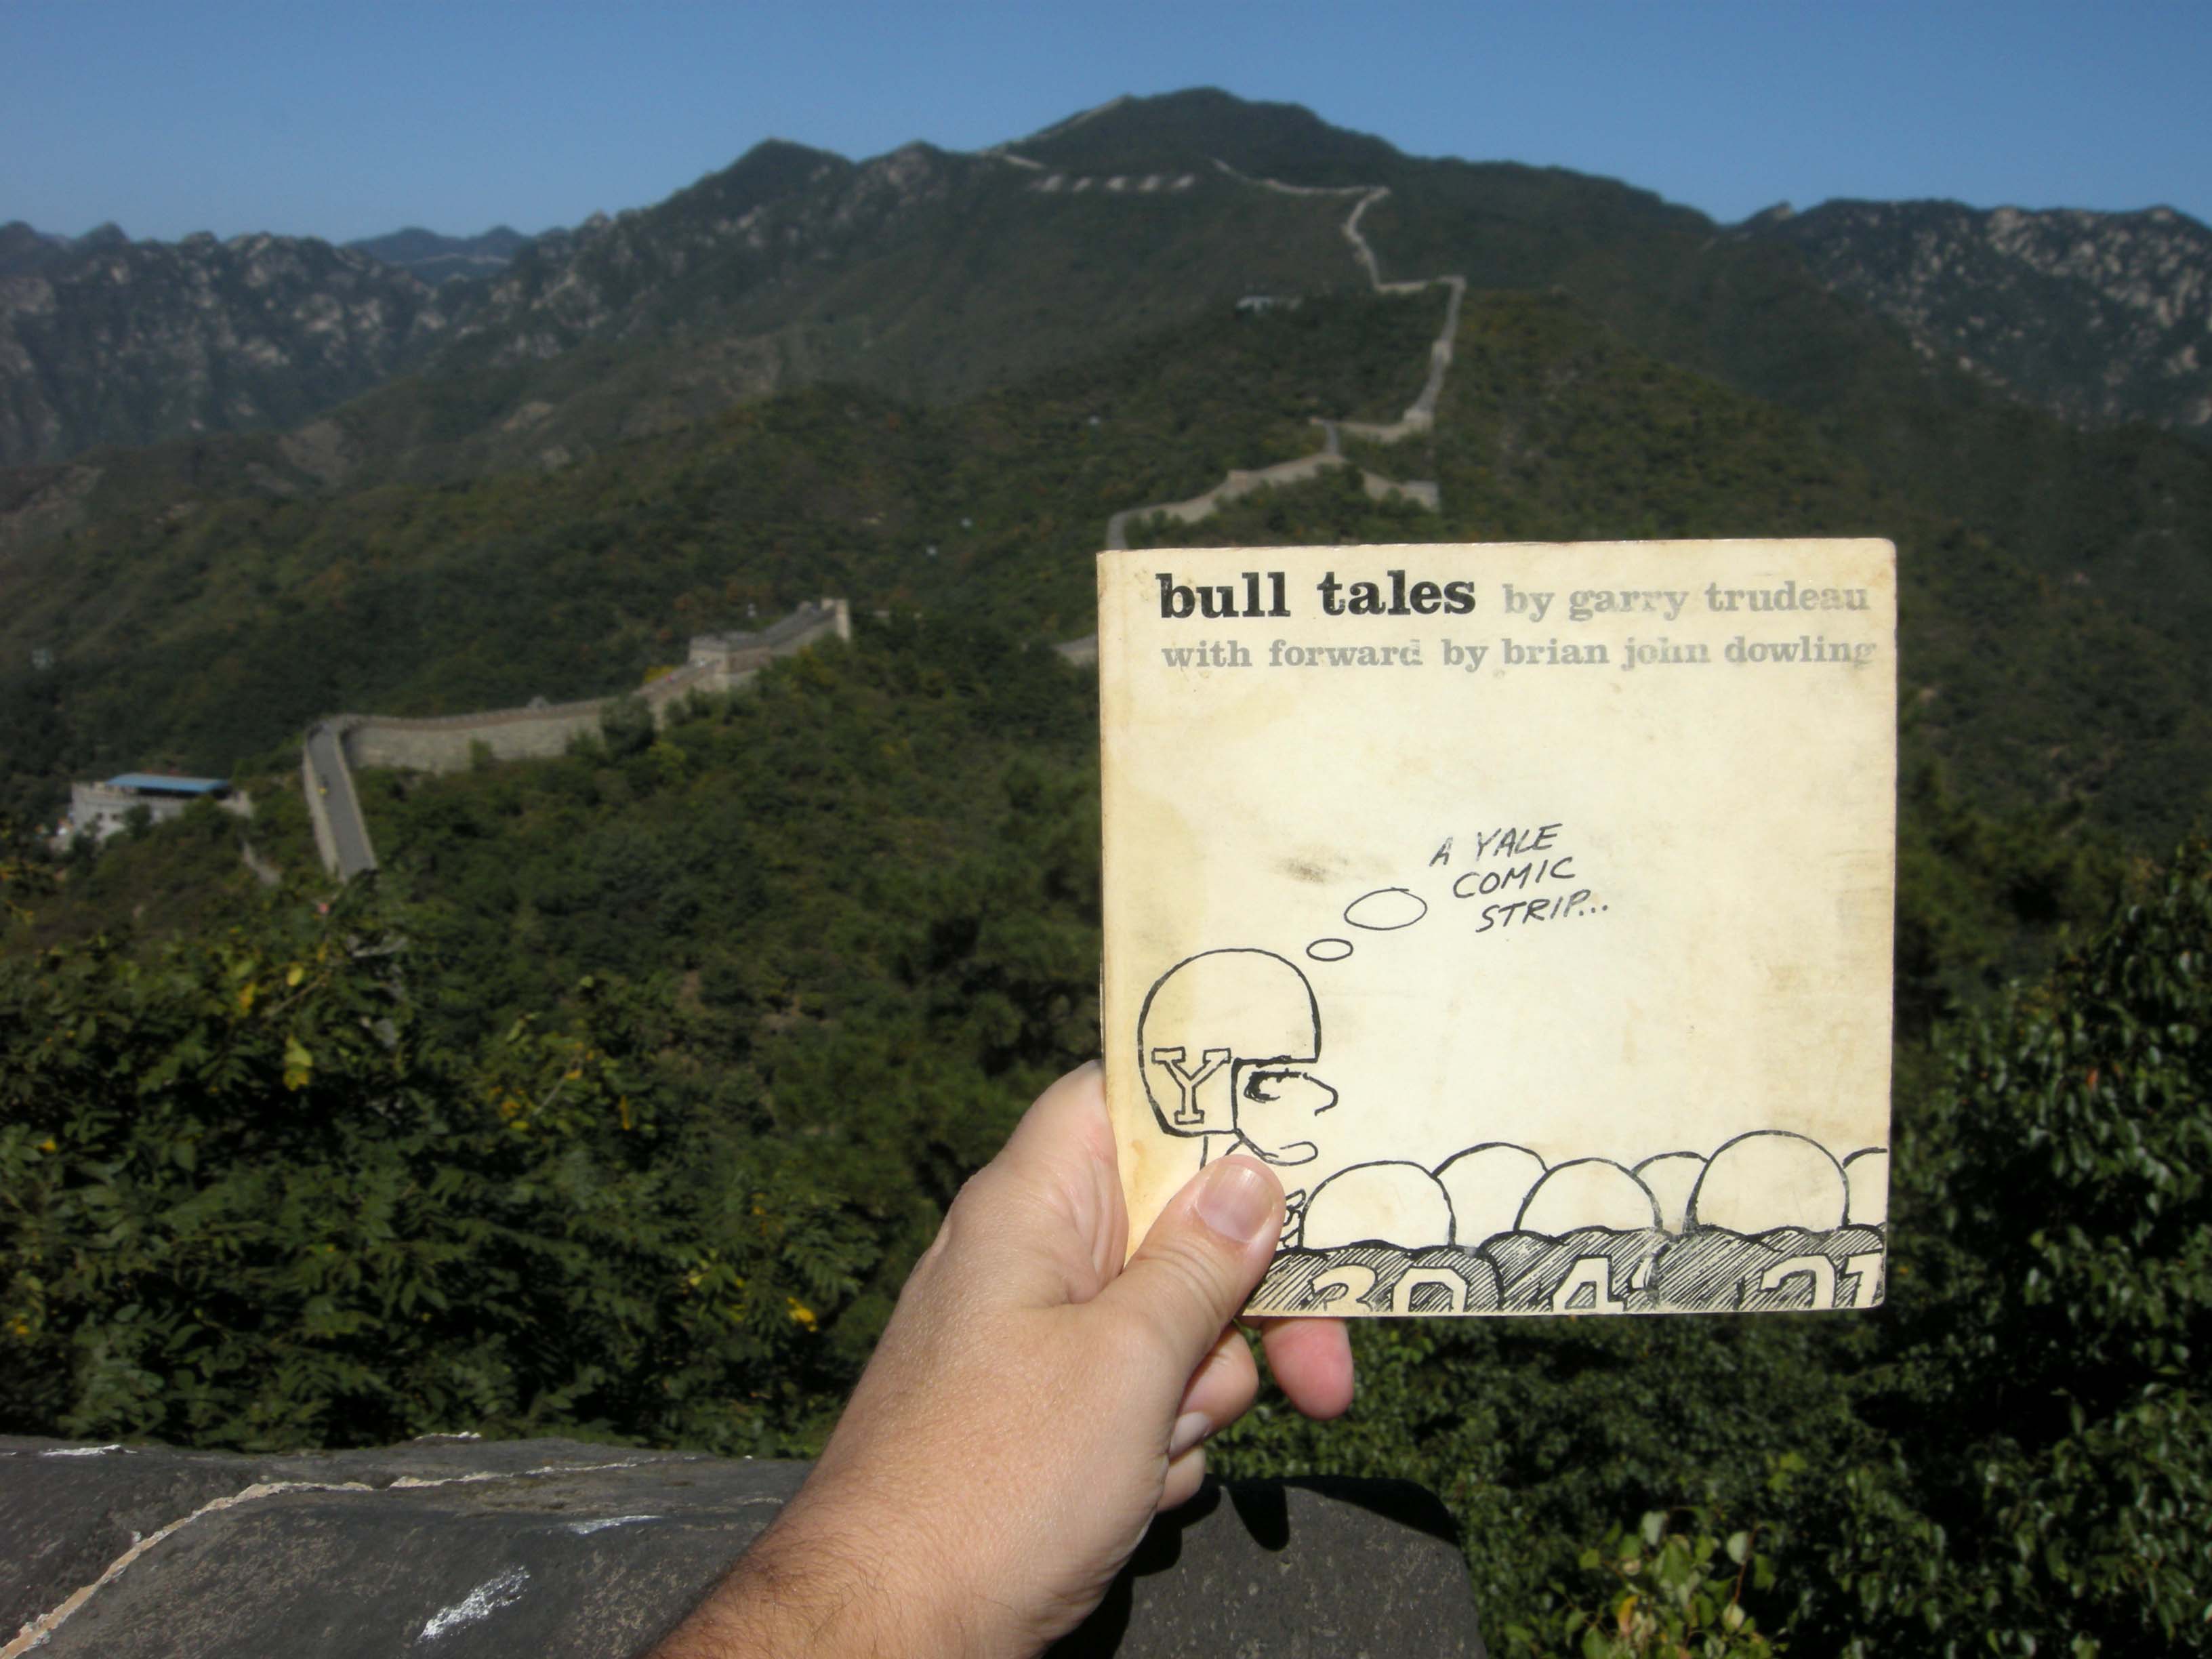 Bull Tales at The Great Wall (21 Sept 2009)